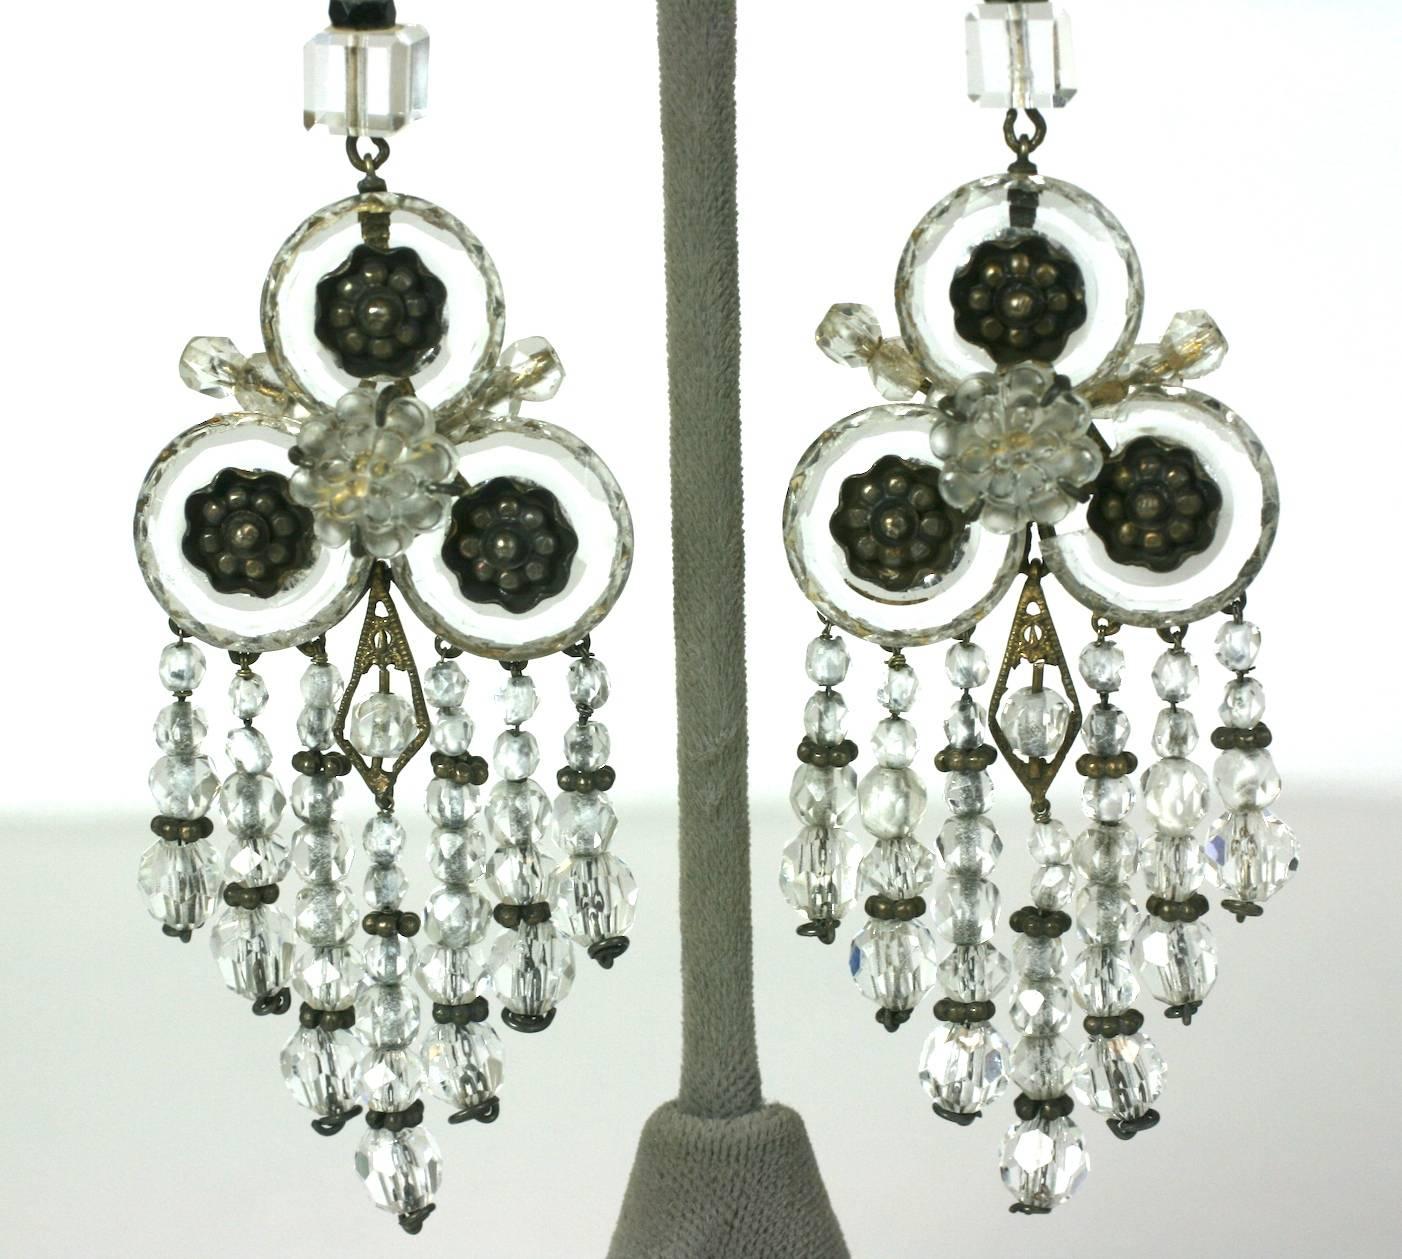 Amazing Art Deco Rock Crystal Fringe Earrings set in gilded silver. Wonderful and unusual design with fringes of rock crystal beads falling from 3 faceted crystal donuts with floral centers. A large molded glass flower centers each earring.